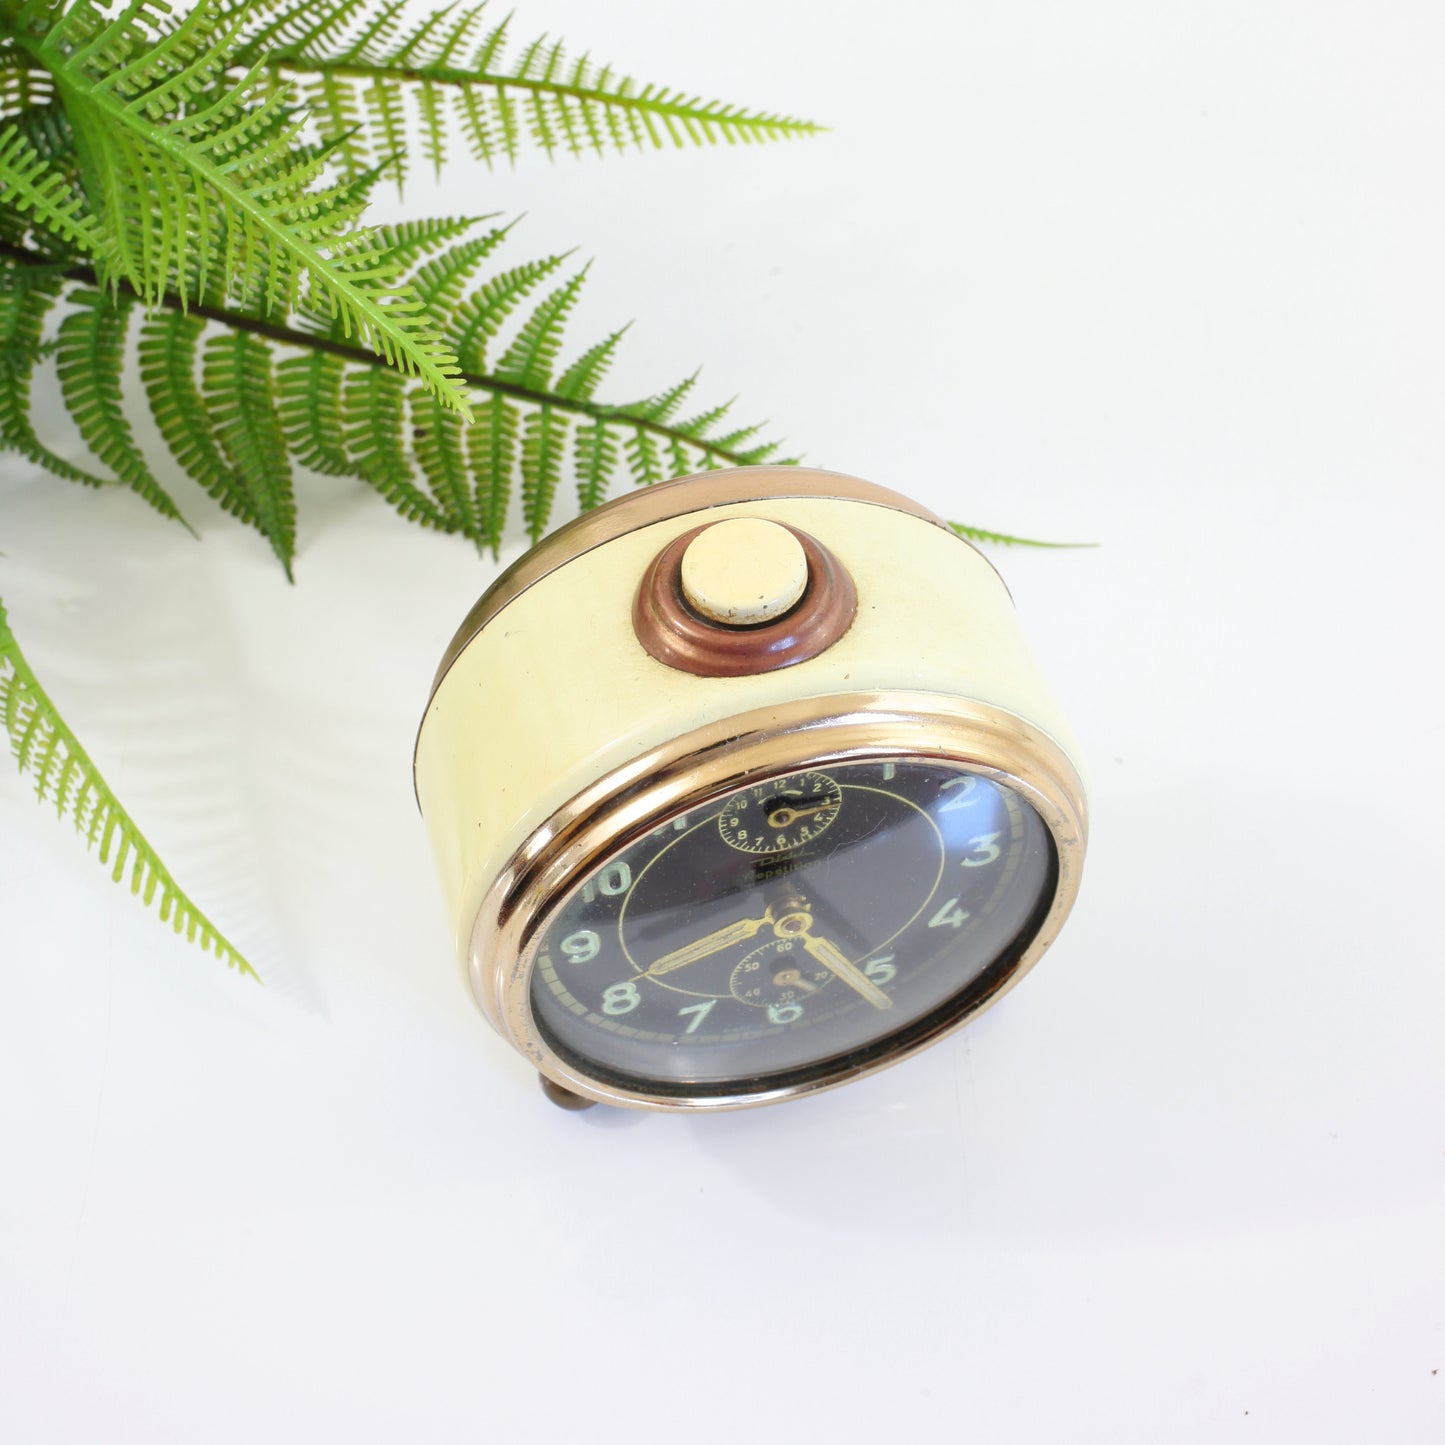 SOLD - Vintage 1940s Repetition Alarm Clock